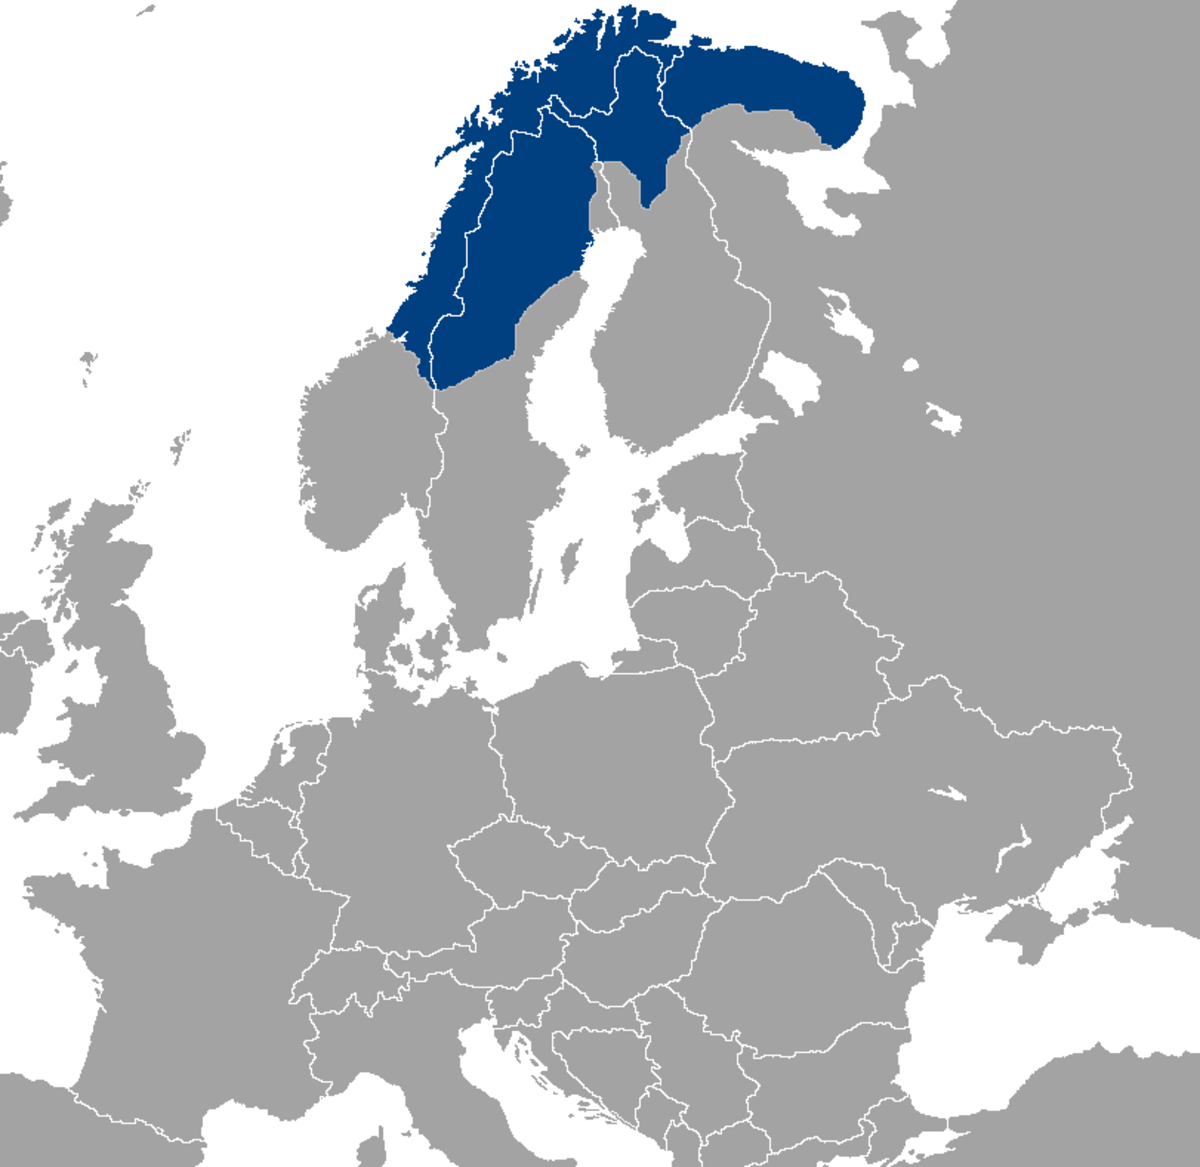 Saami territory spreads from Norway and Sweden to Finland and Russia.